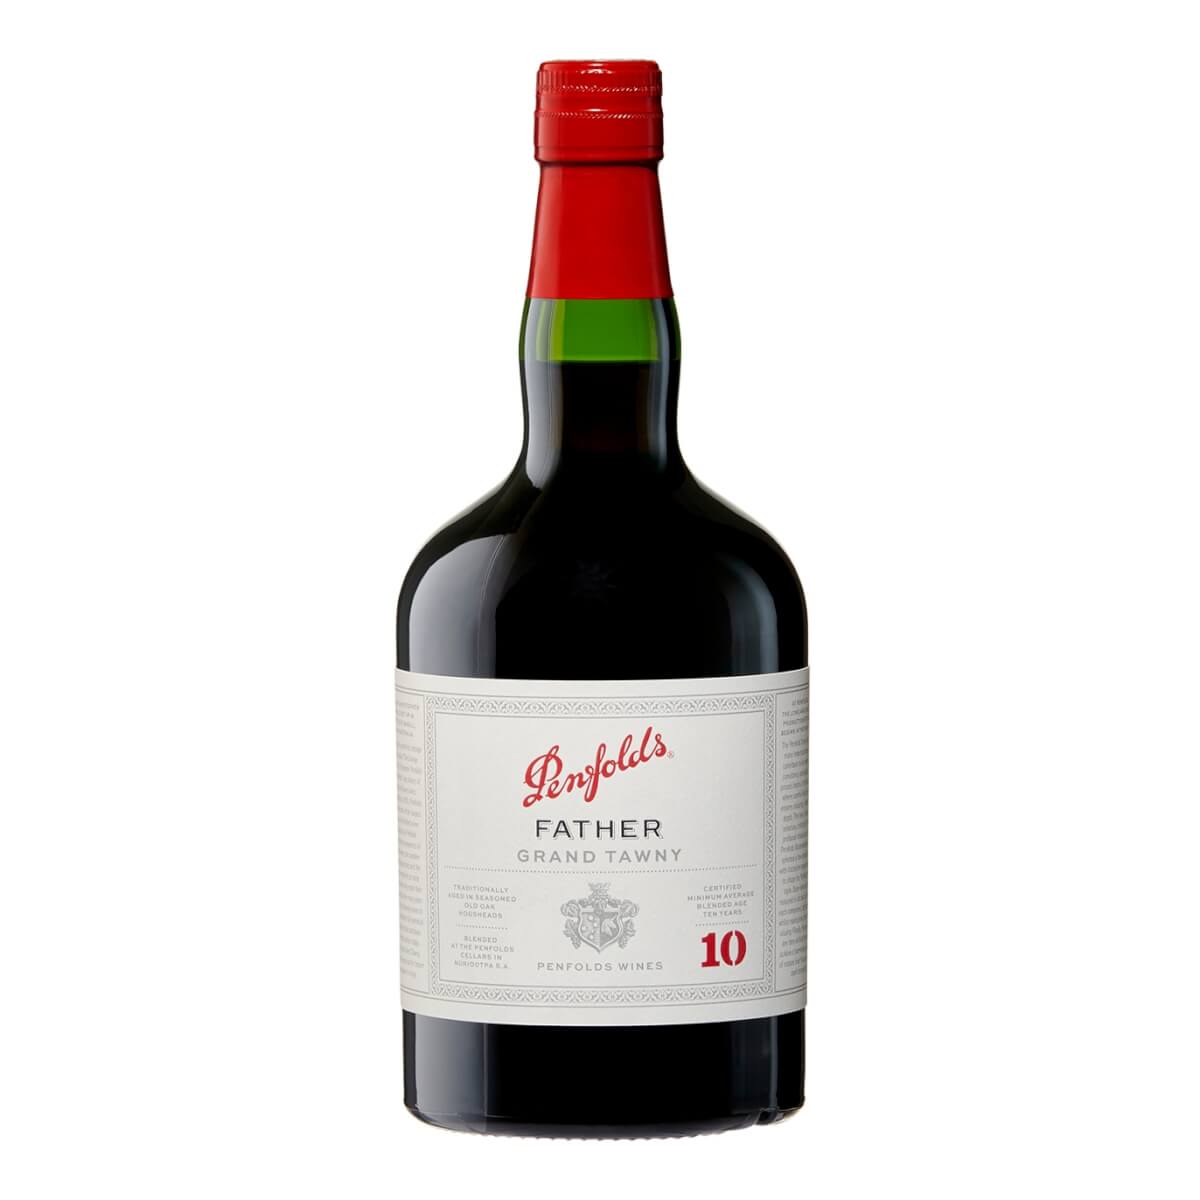 Penfolds Father Grand Tawny 10 Year Old Fortified Wine NV Port And Fortified Wine